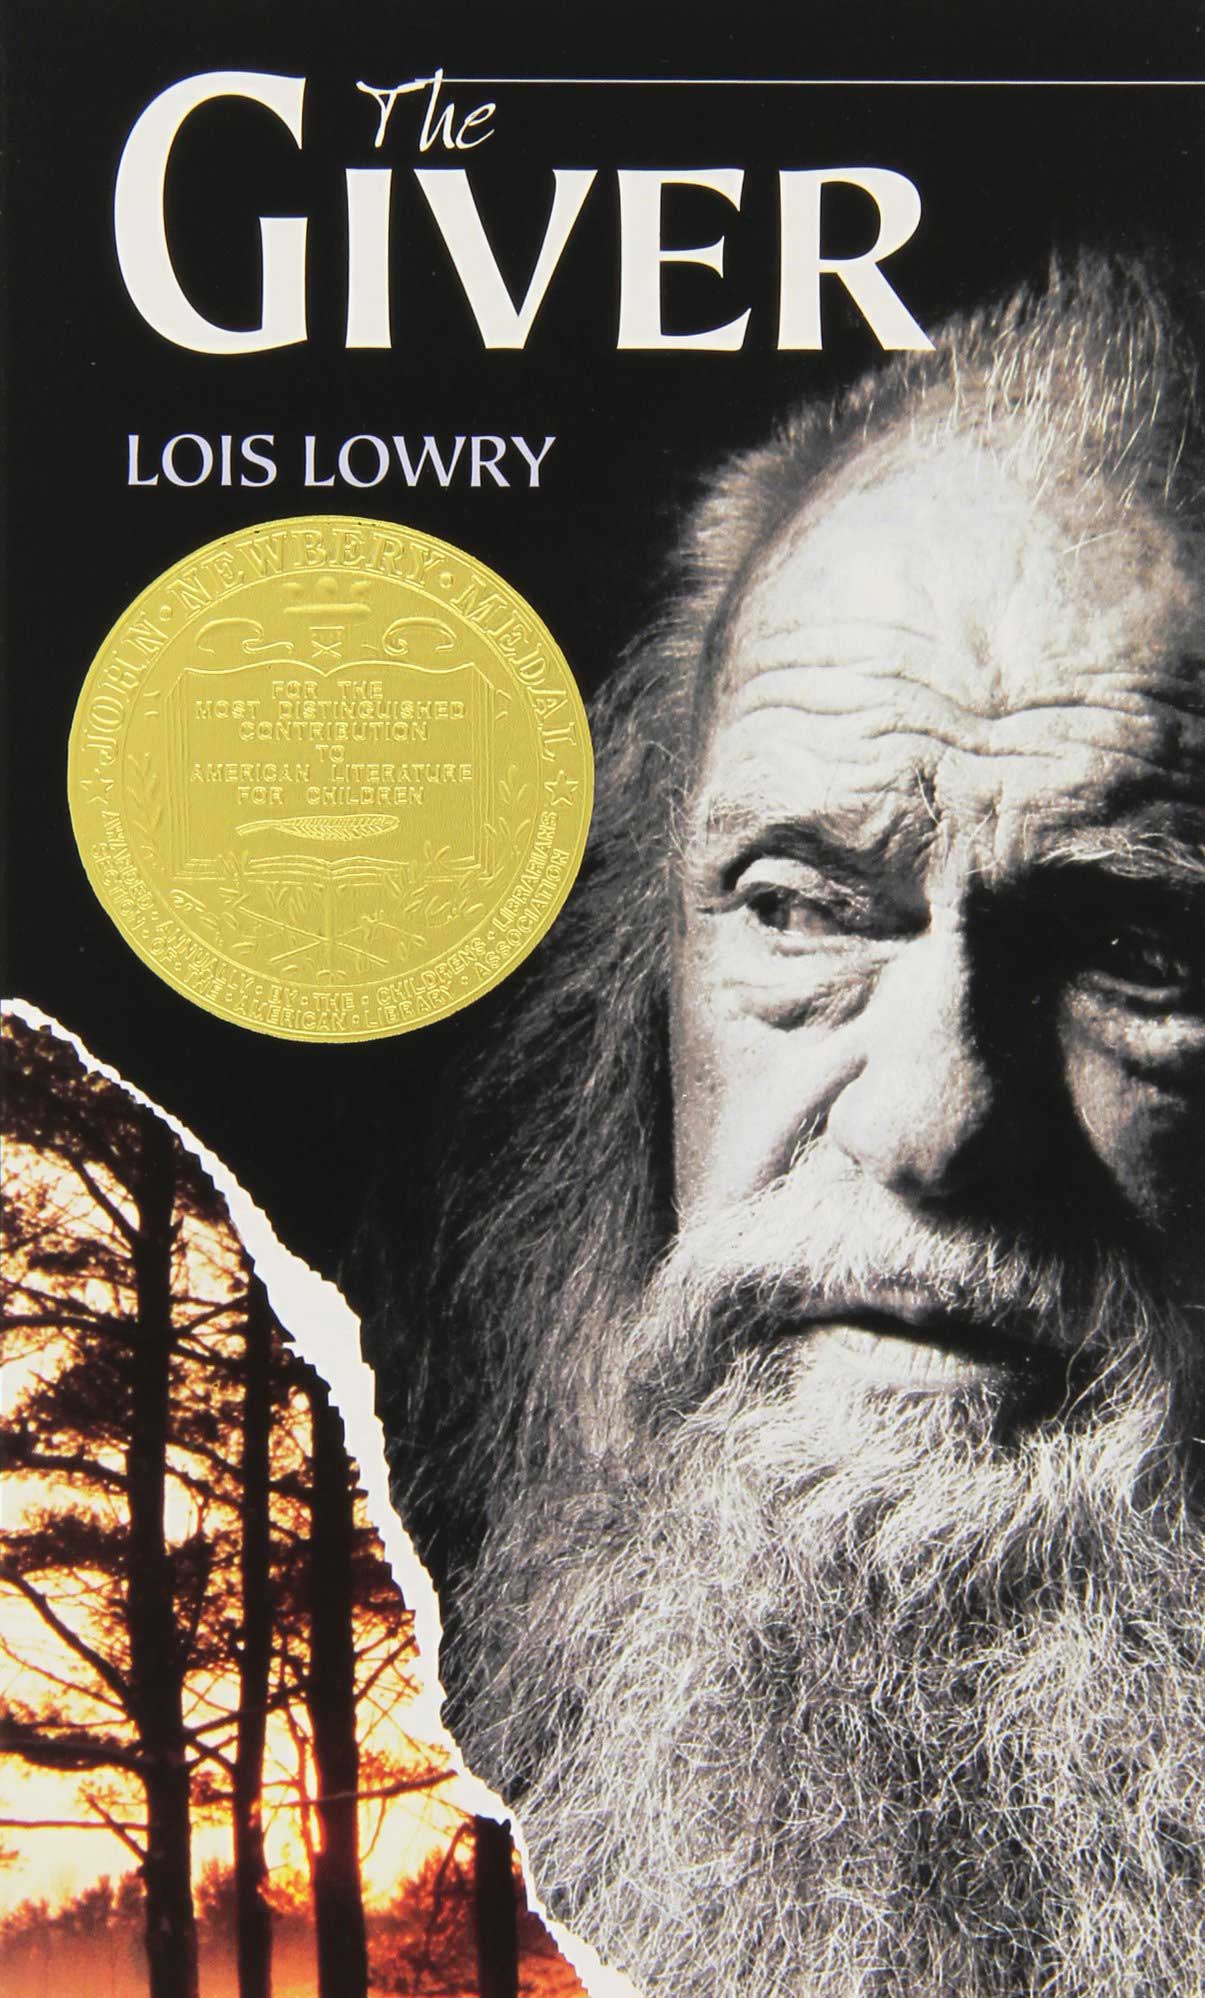 The Giver, by Lois Lowry. 
                              
                              
                              
                              This tale of self-discovery in a dystopian society has a memorable central character, Jonas, and an indelible message— that pain and trauma have an important place in individual lives and in society, and to forget them is to lose what makes us human.
                              
                              
                              
                              Buy now: The Giver